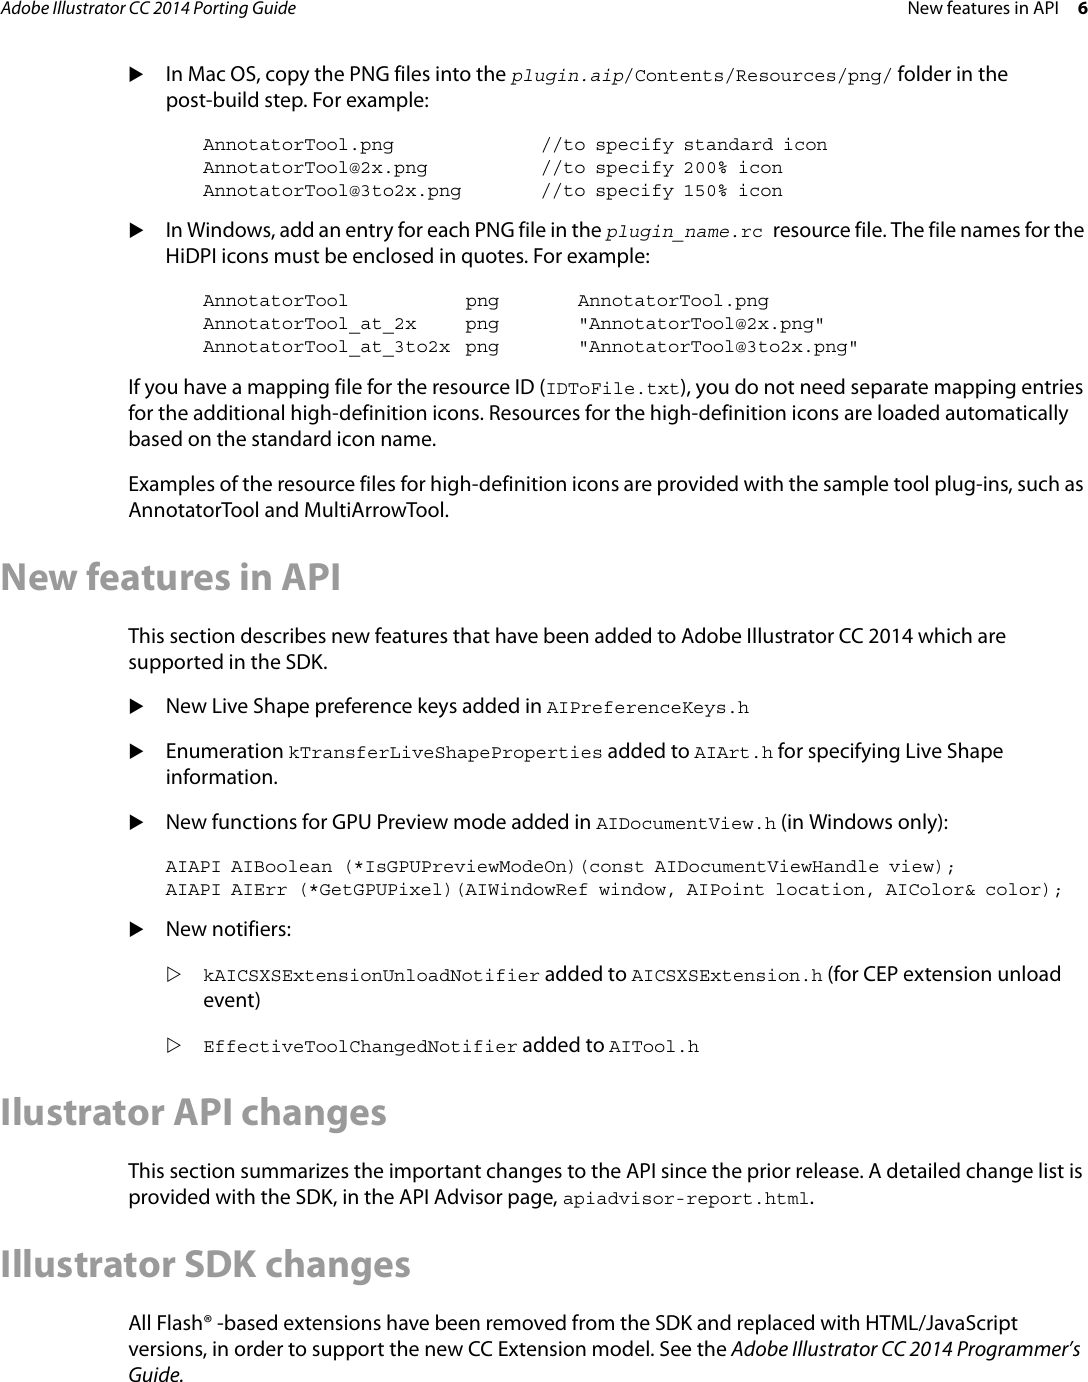 Page 6 of 6 - Adobe Illustrator CC 2014 Porting Guide - (2014) Porting-cc2014-en